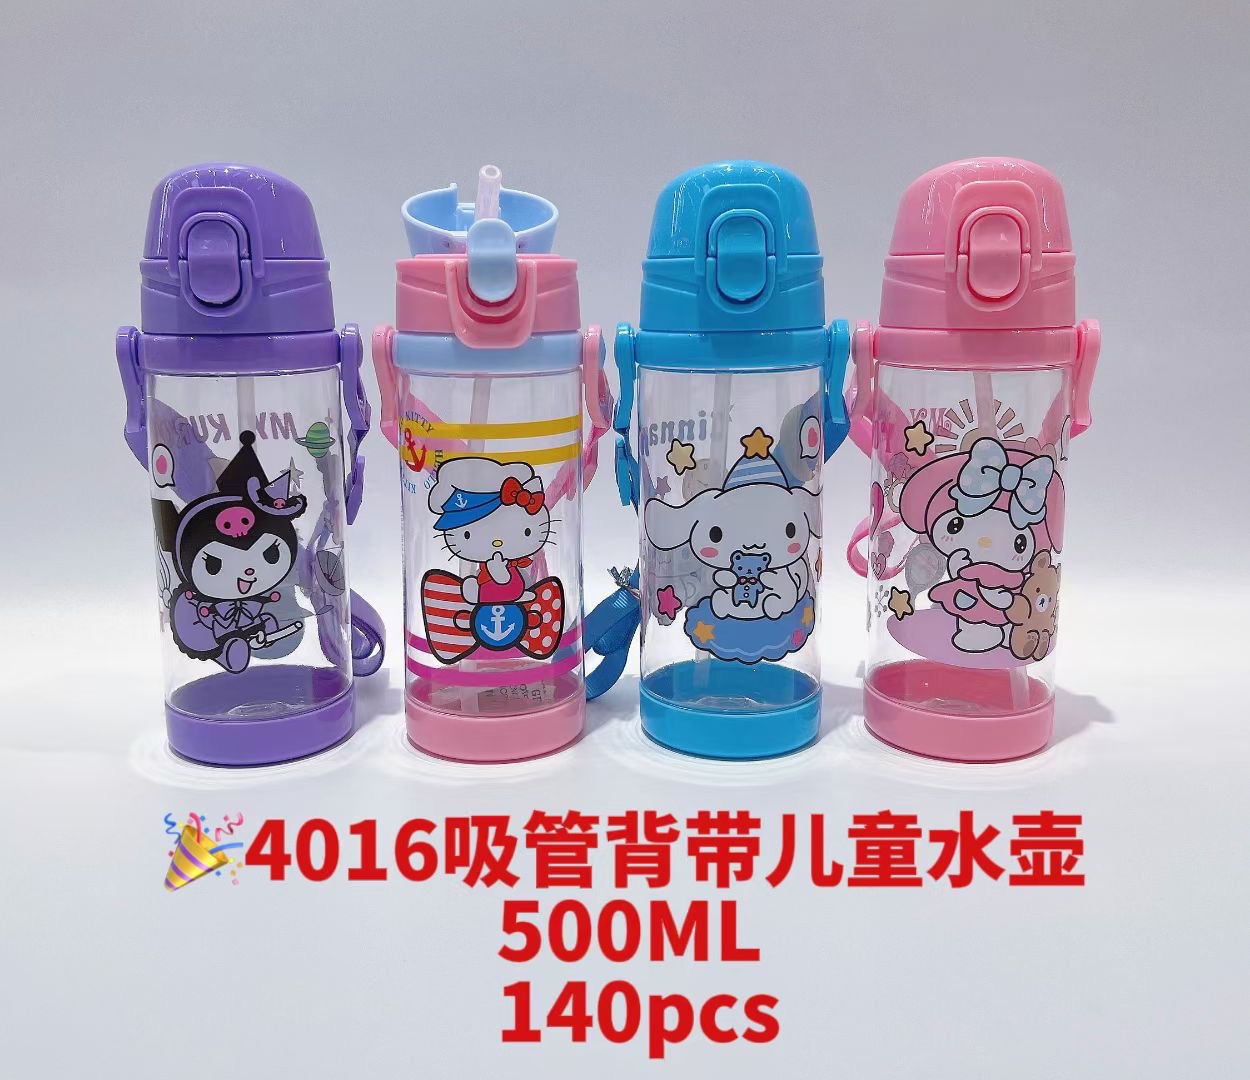 4016 Sanrio Cartoon Plastic Water Cup Children's Direct Drinking Water Bottle with Shoulder Strap Student Kettle Portable Cup Factory Direct